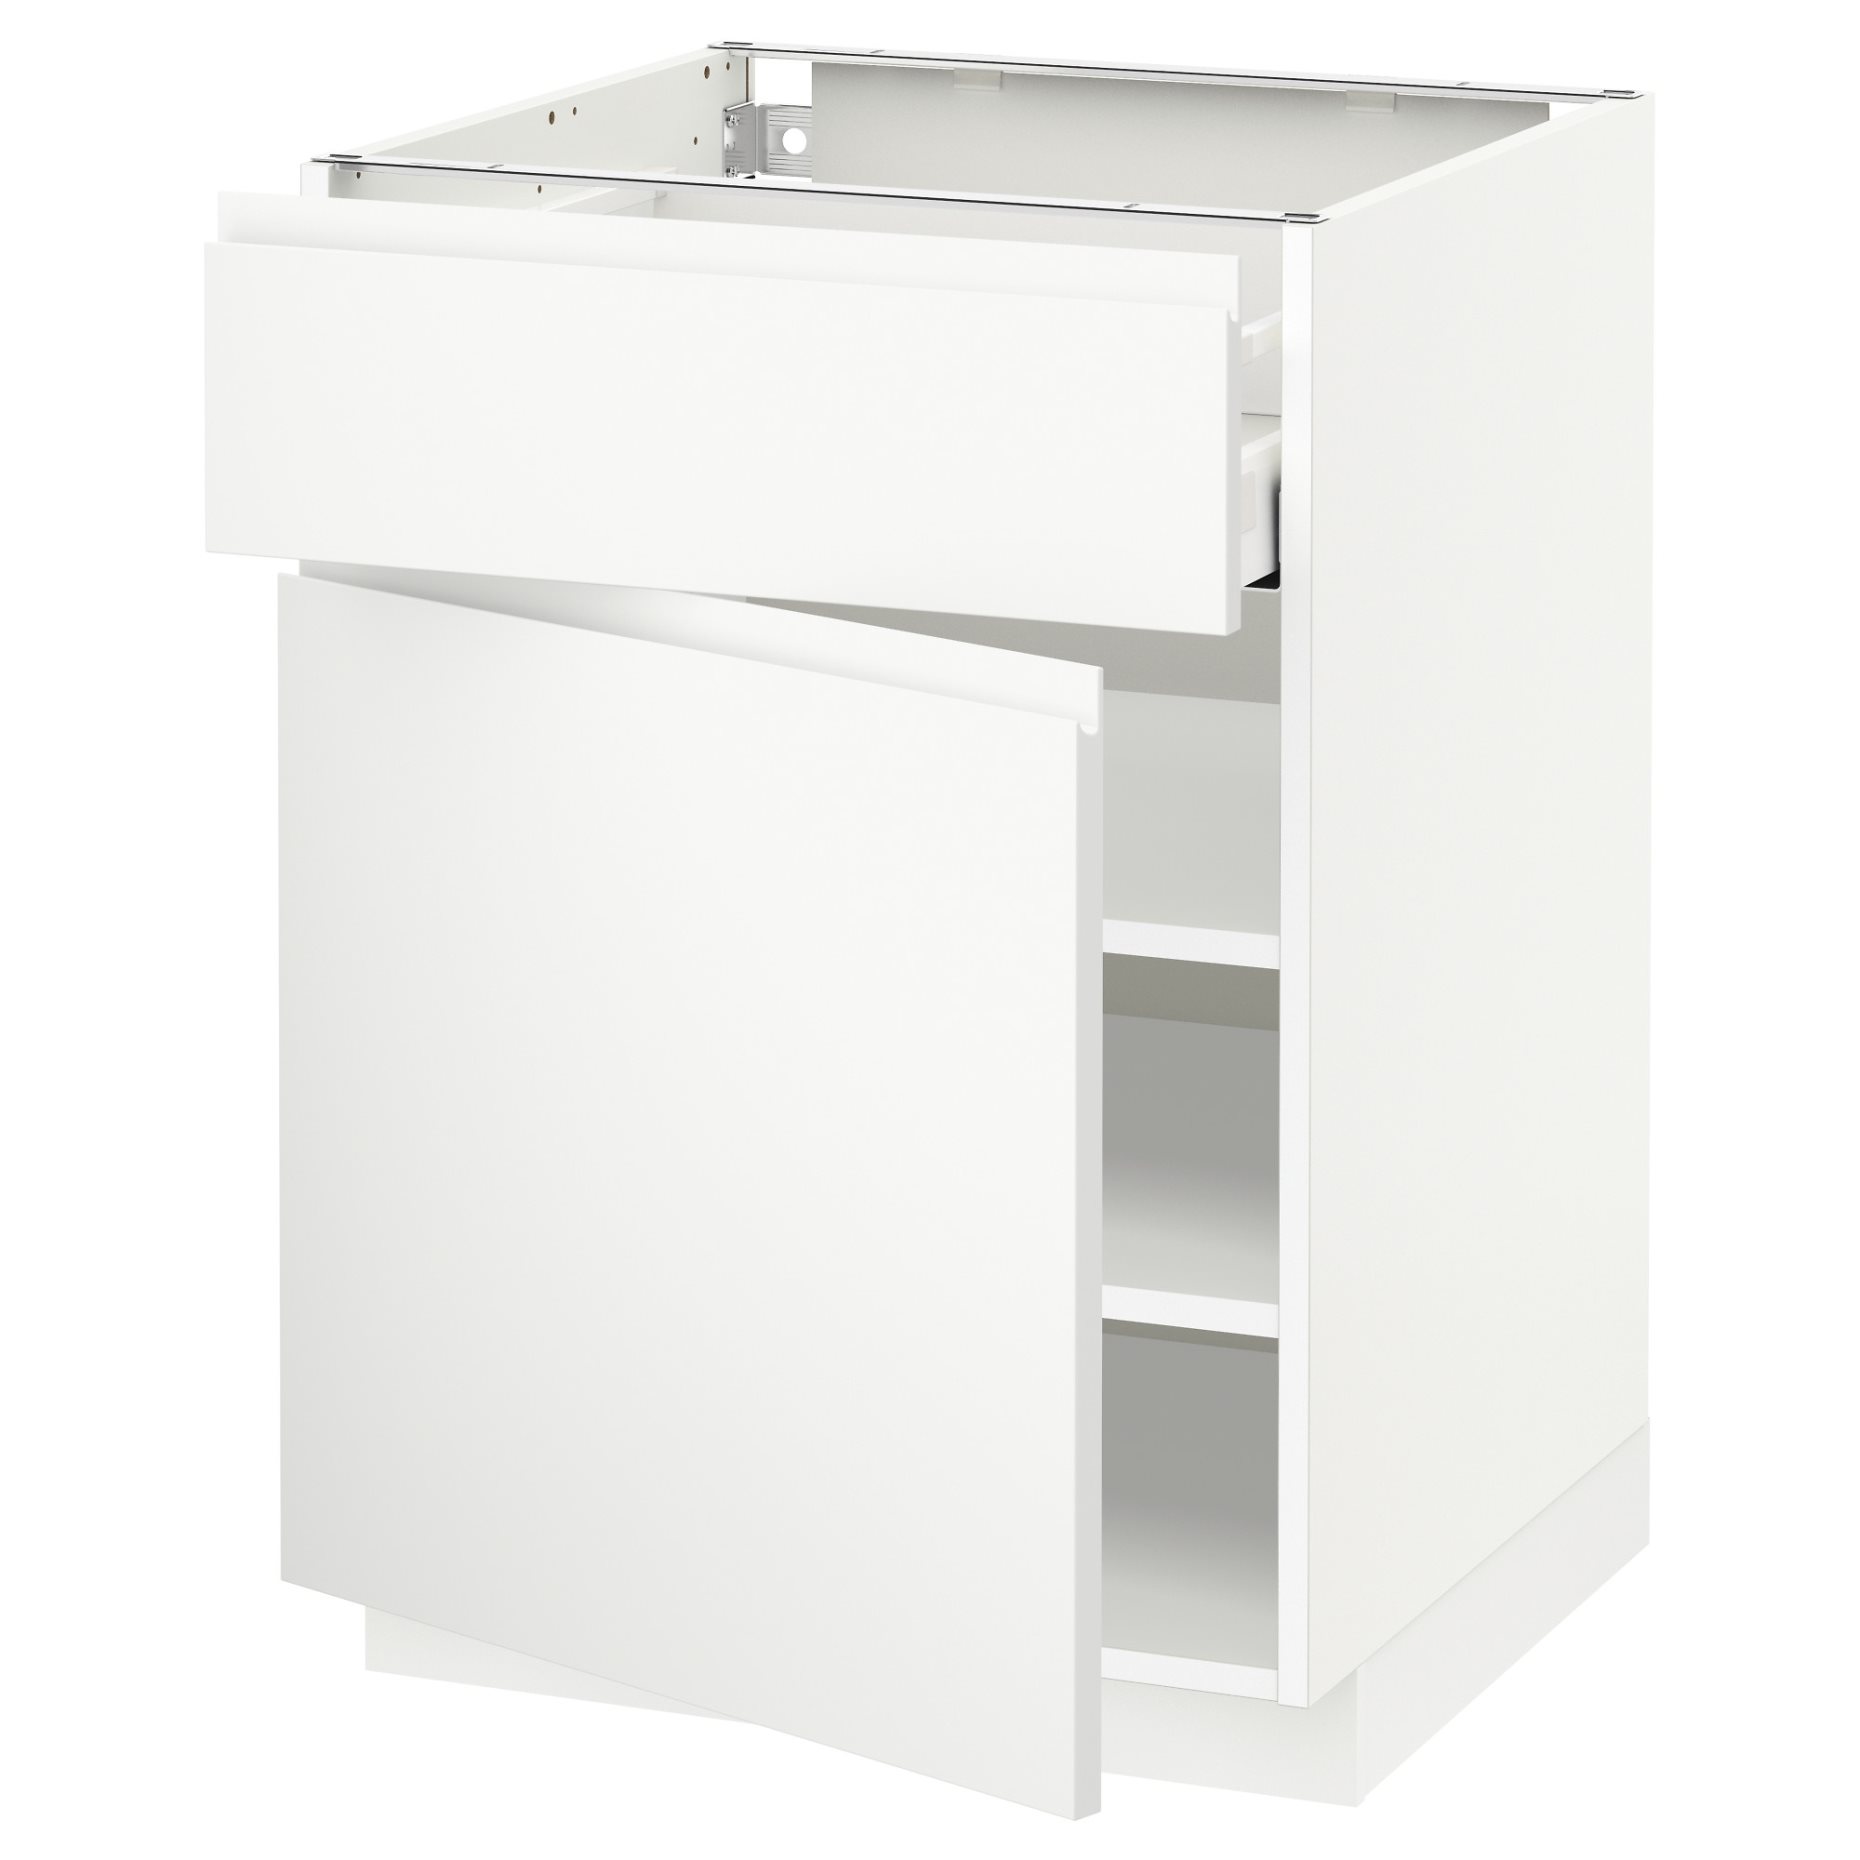 METOD/MAXIMERA, base cabinet with drawer/door, 60x60 cm, 094.644.77